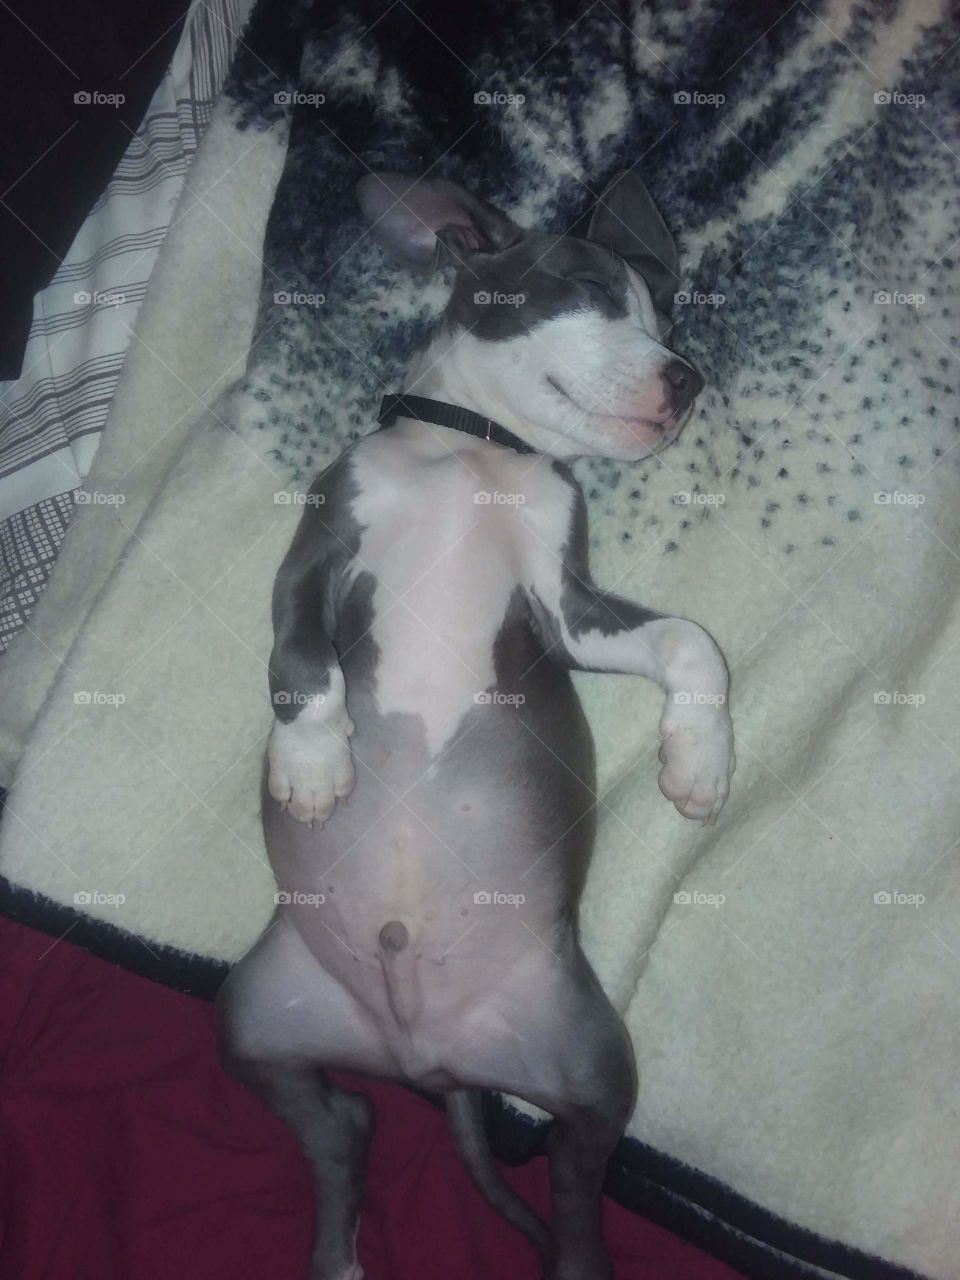 Sleeping like a baby! Look at all that Pit puppy love!